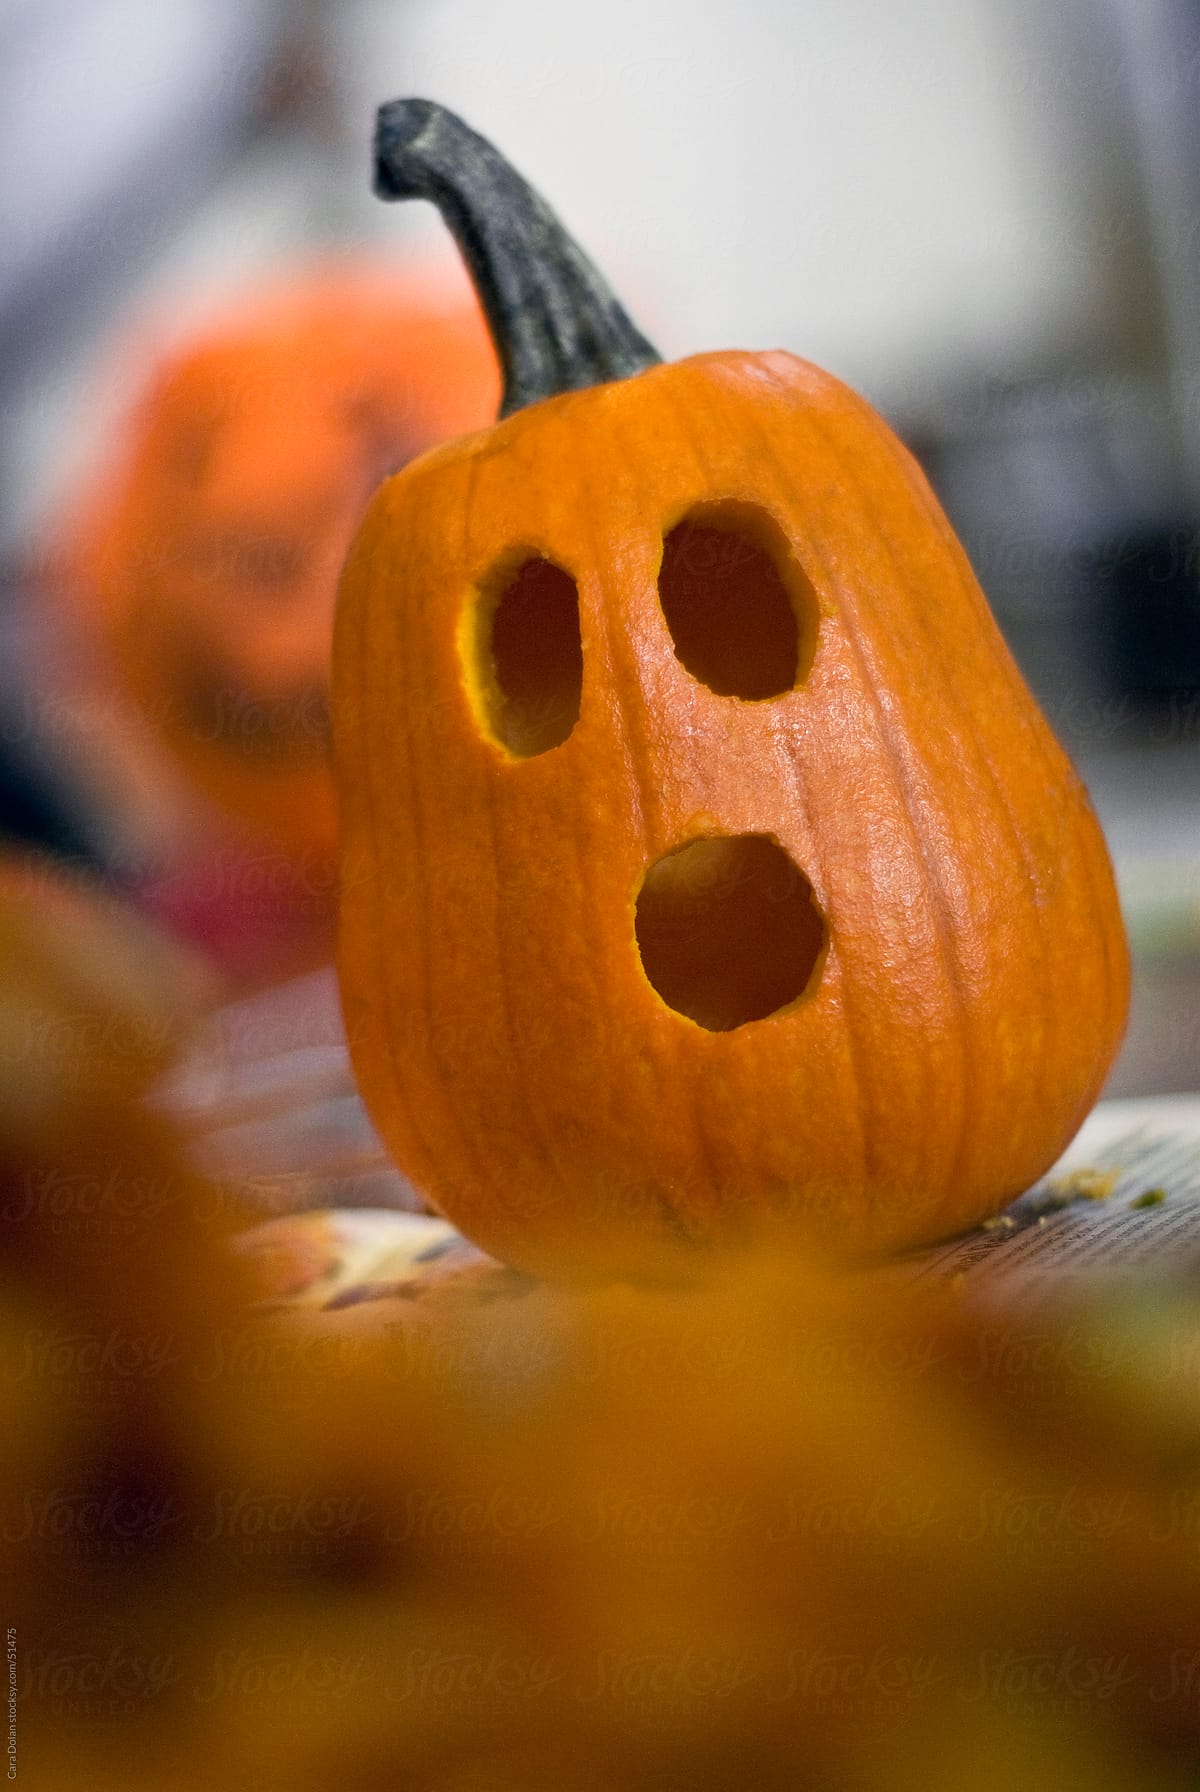 Little Halloween pumpkin has a surprised face carved into it